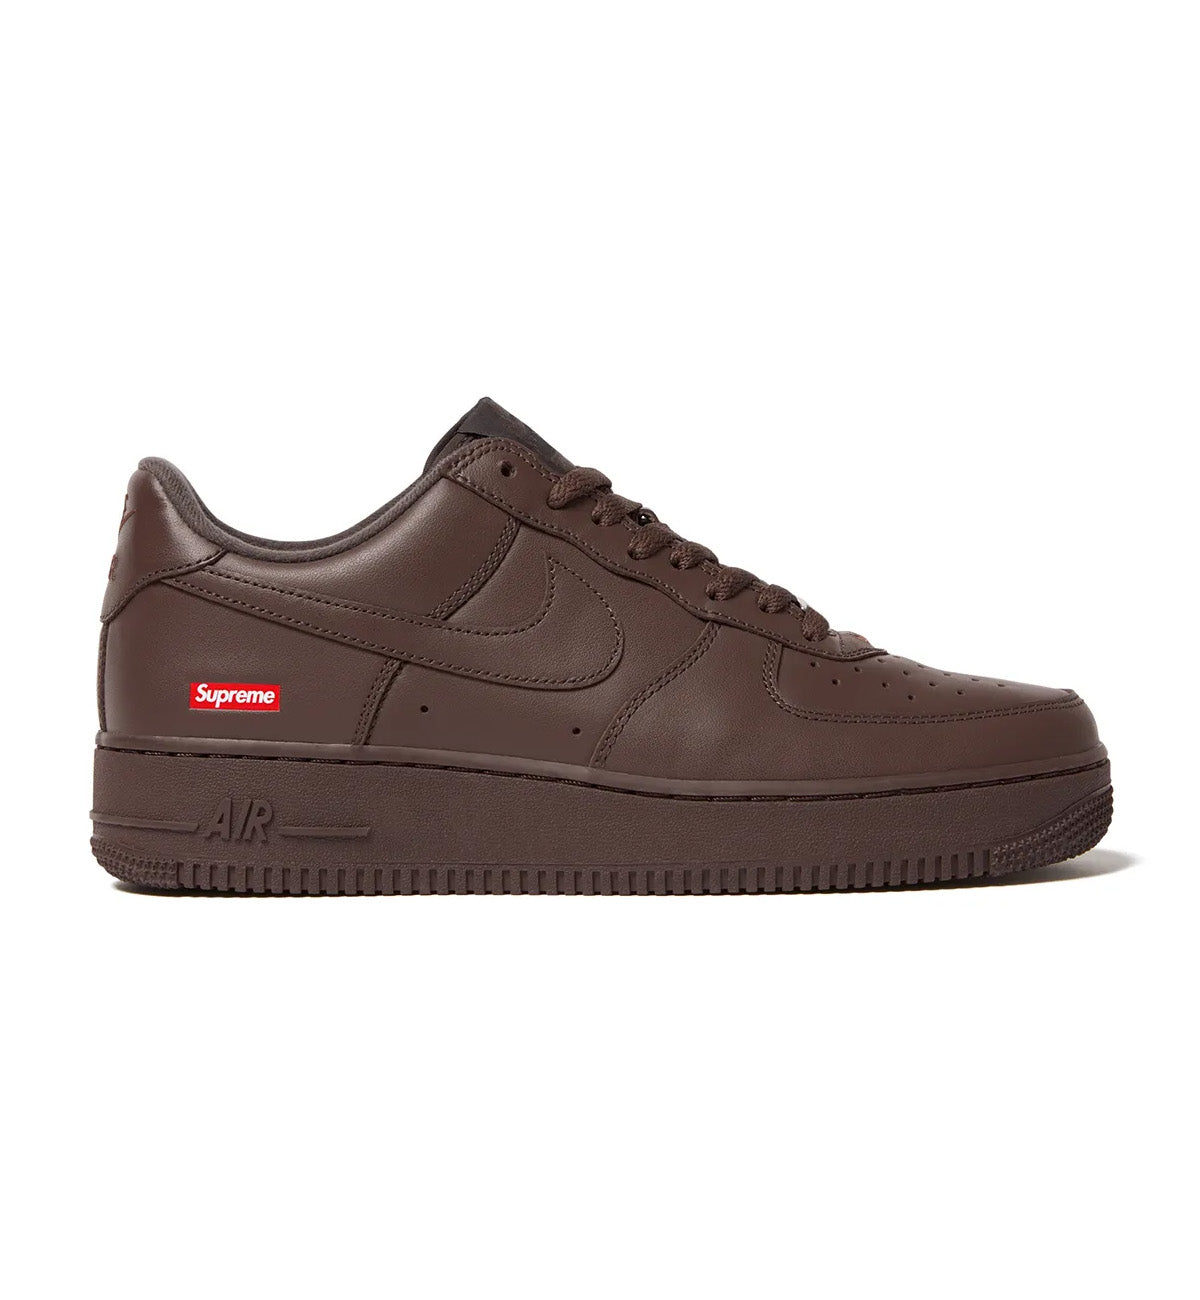 Supreme x Nike Air Force 1 “Baroque Brown” – The Factory KL